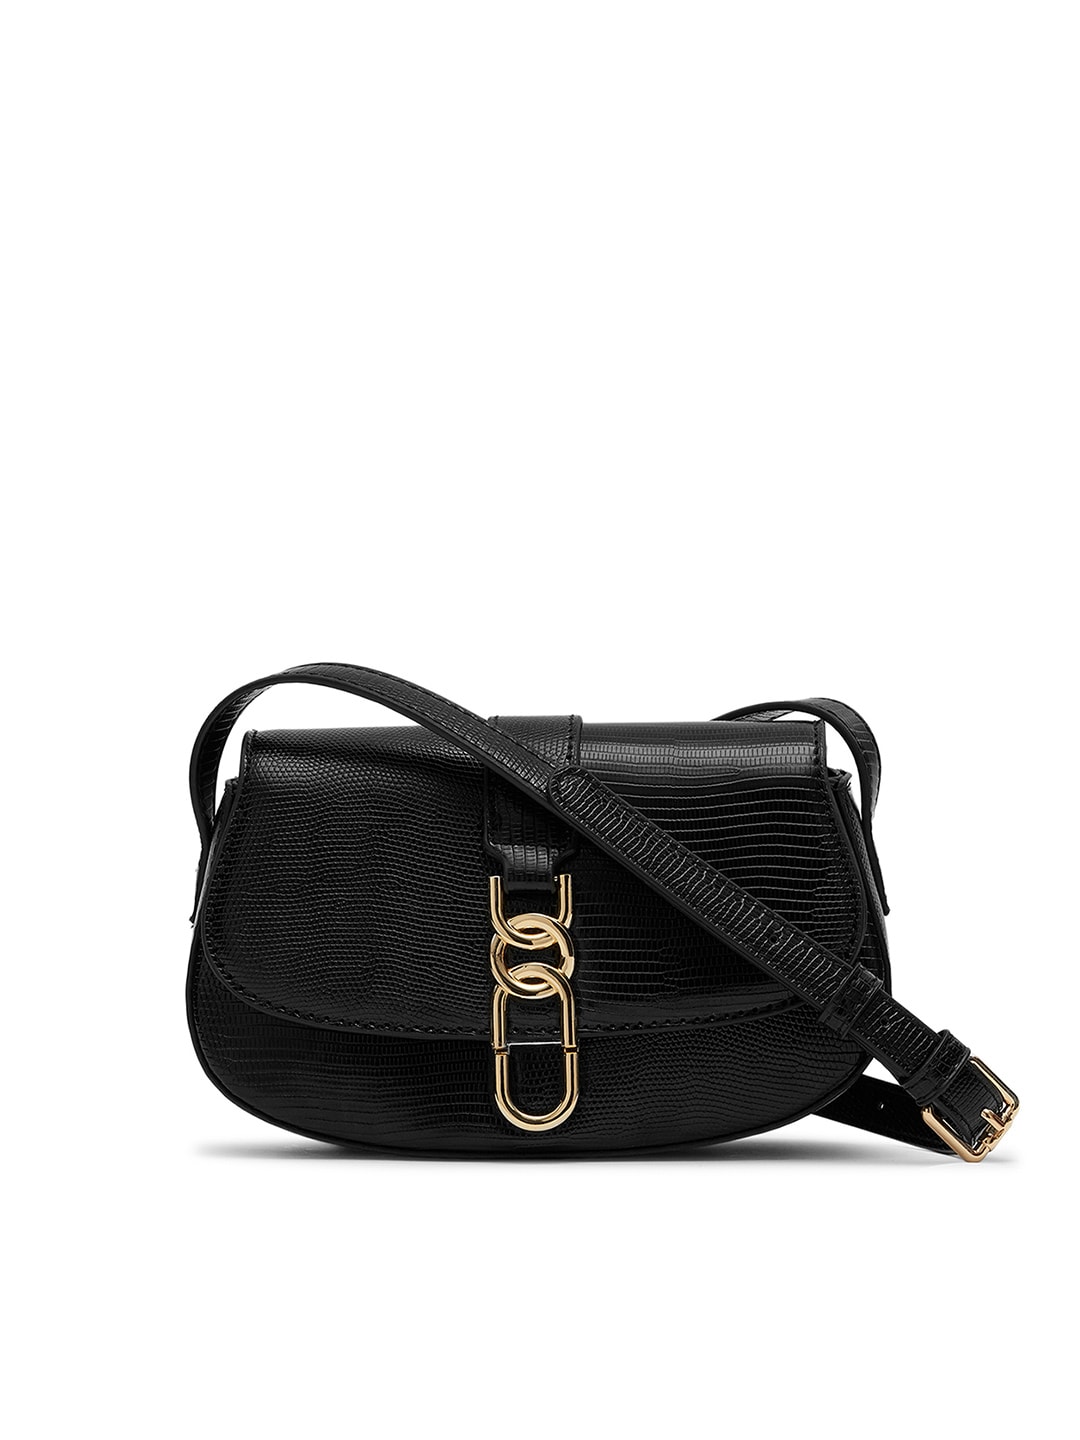 Buy MIRAGGIO MIRAGGIO Textured Structured Sling Bag at Redfynd